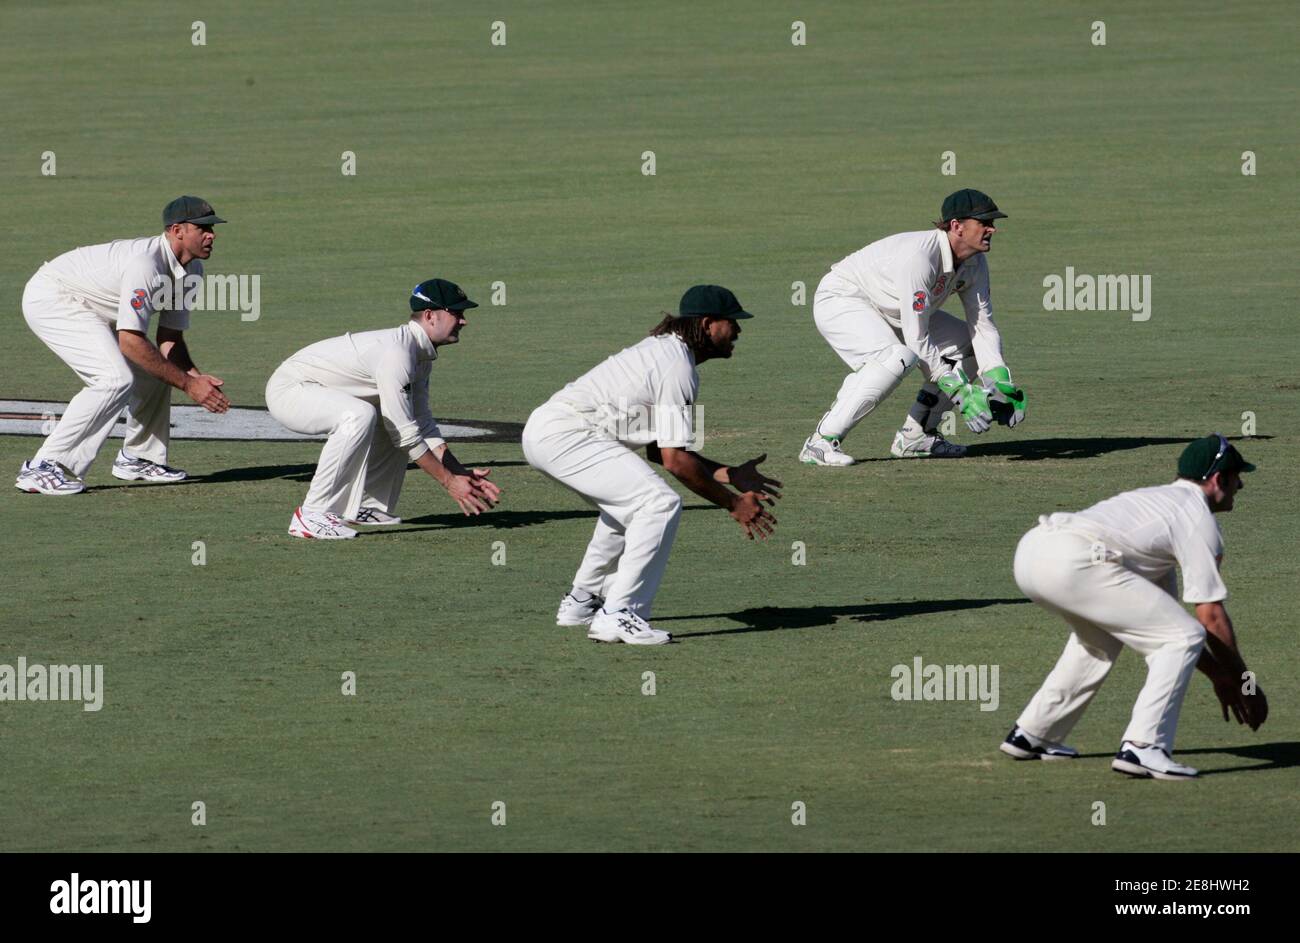 Australia's (L-R) Matthew Hayden, Michael Clarke, Andrew Symonds, Adam Gilchrist and Michael Hussey wait in the slips during the fourth day of their fourth and final test cricket match against India at the Adelaide Oval January 27, 2008. REUTERS/Will Burgess   (AUSTRALIA) Stock Photo